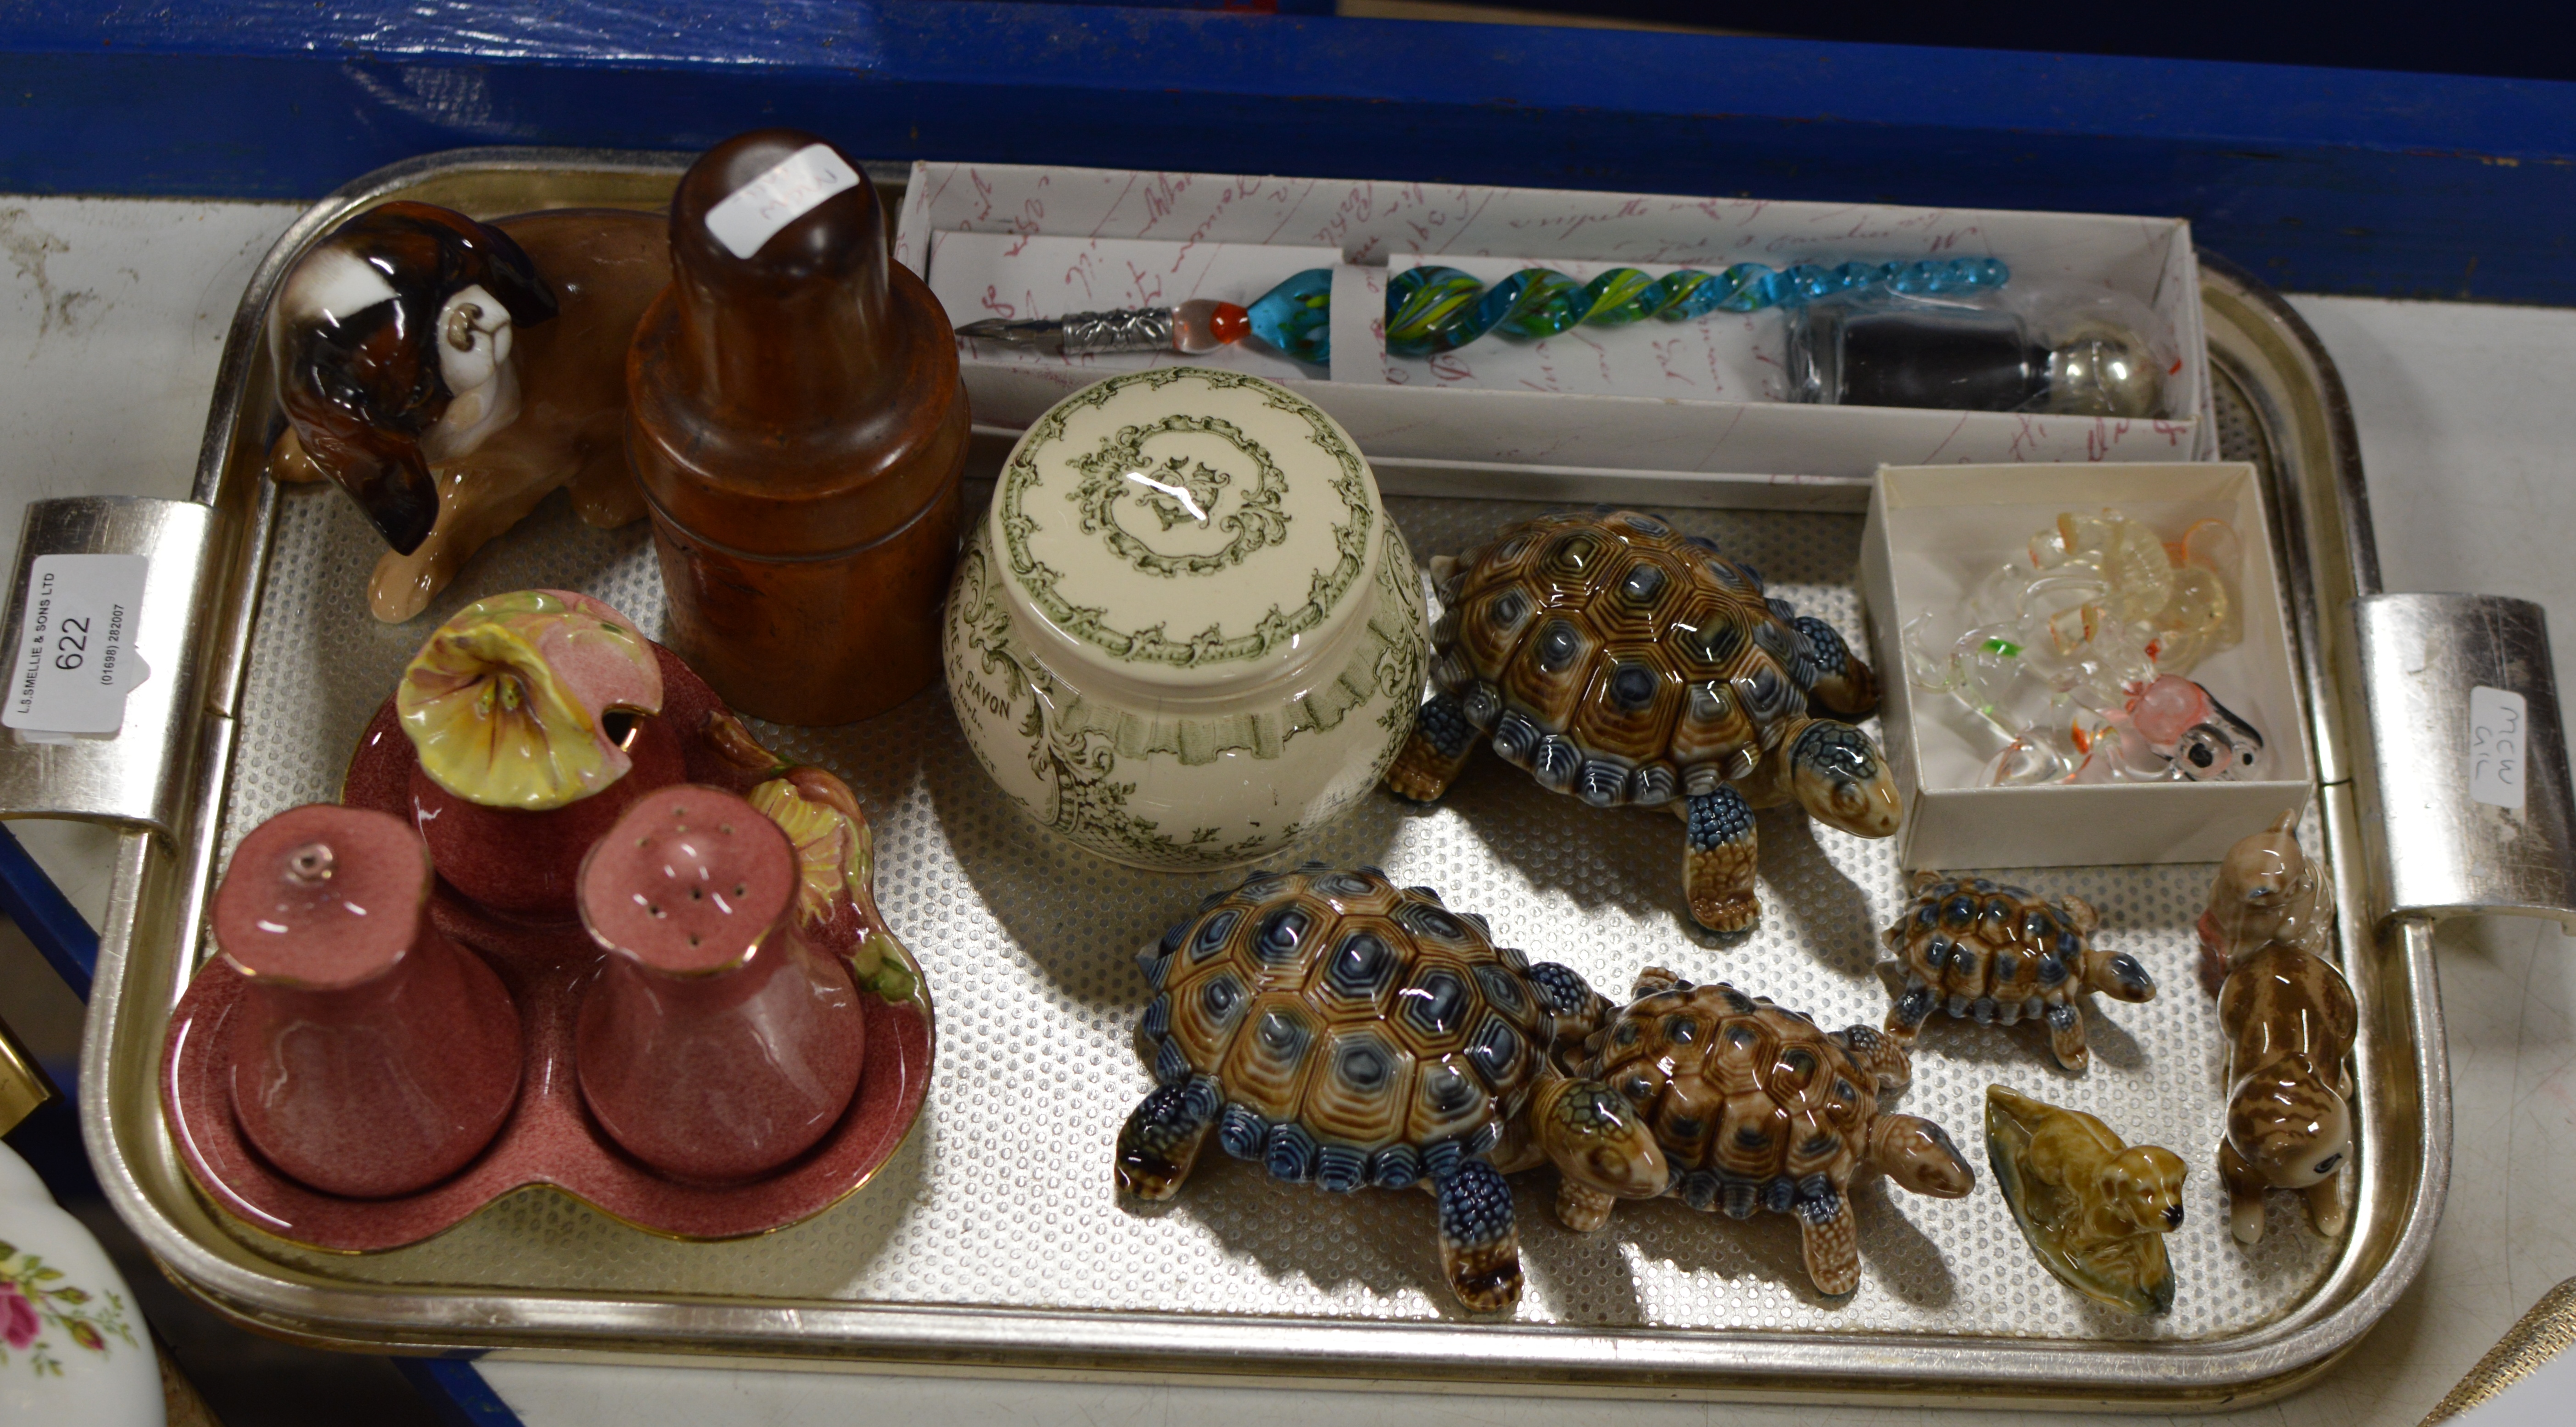 TRAY WITH ROYAL WINTON CRUET SET, VARIOUS WADE ANIMAL ORNAMENTS, BLOWN GLASS ORNAMENTS, WOODEN CASED